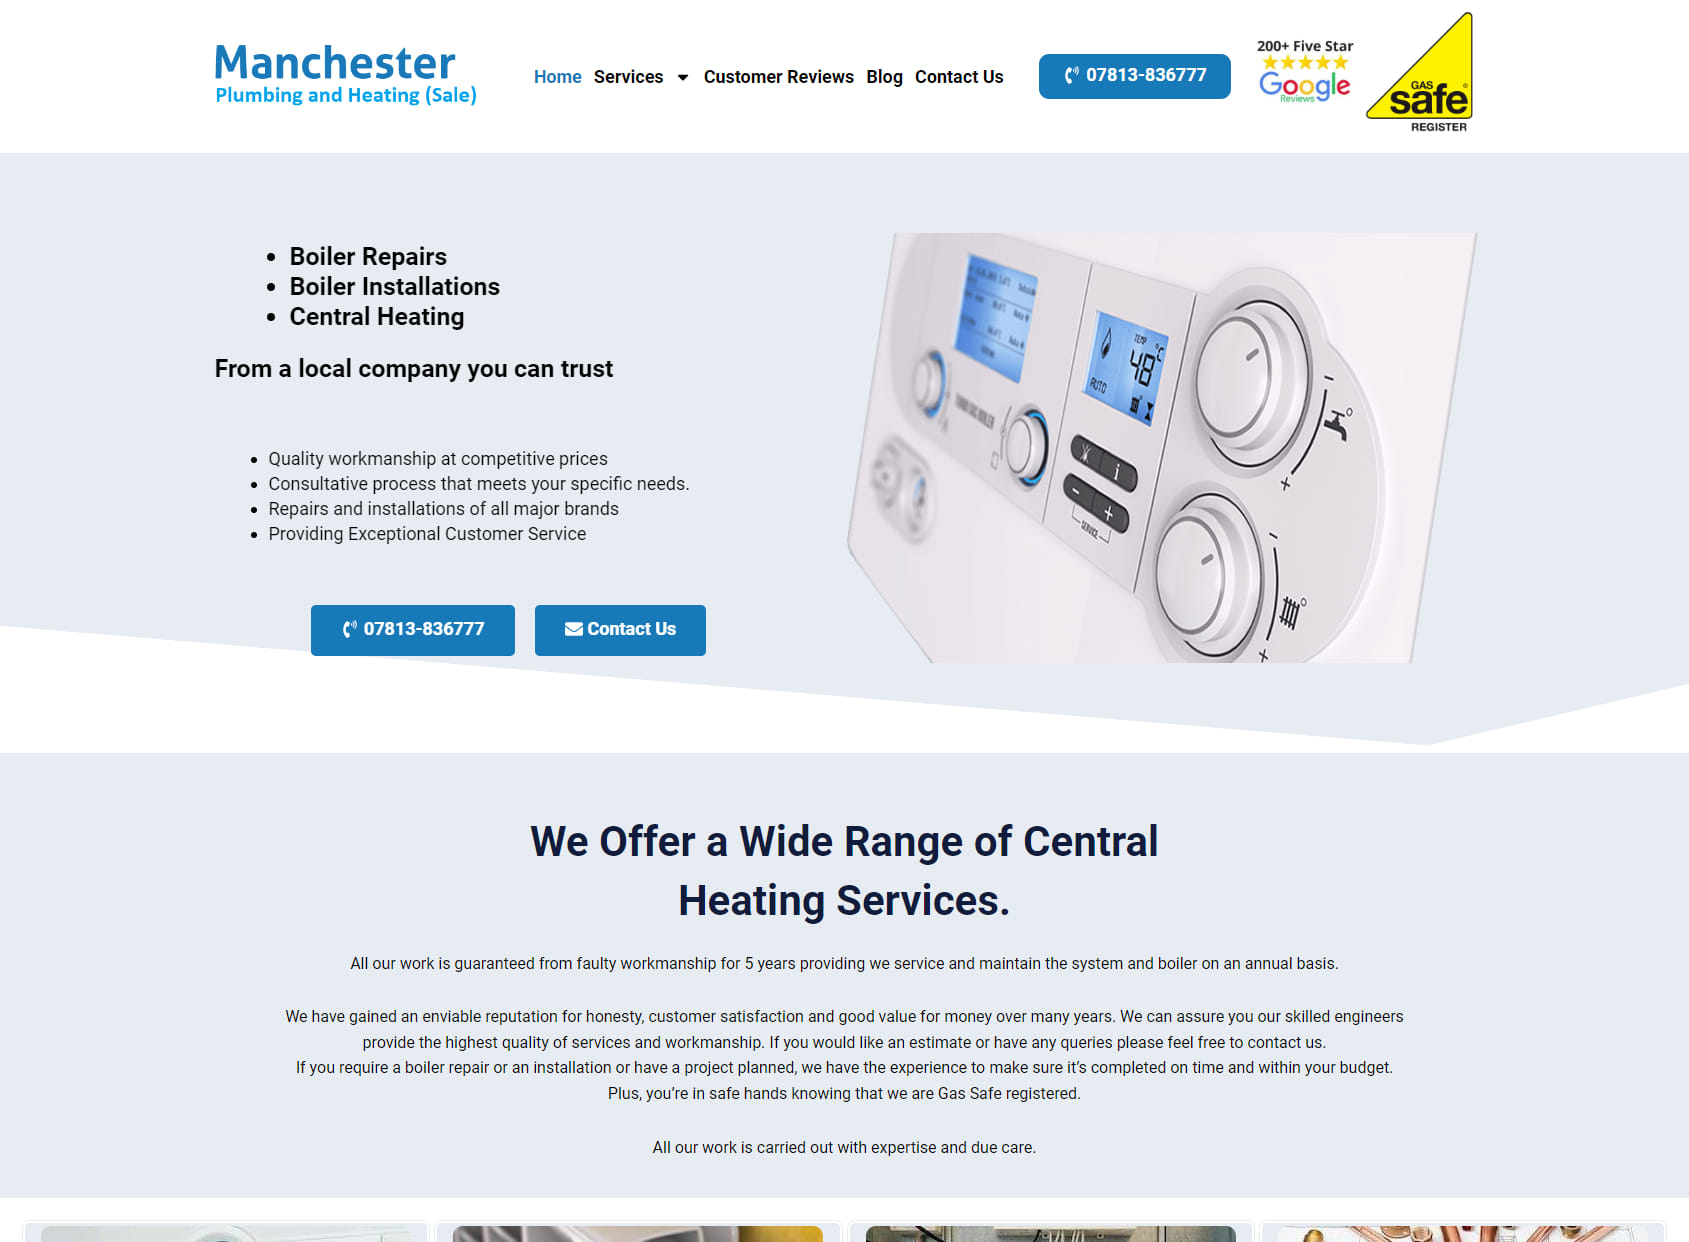 Manchester Plumbing and Heating (Sale).